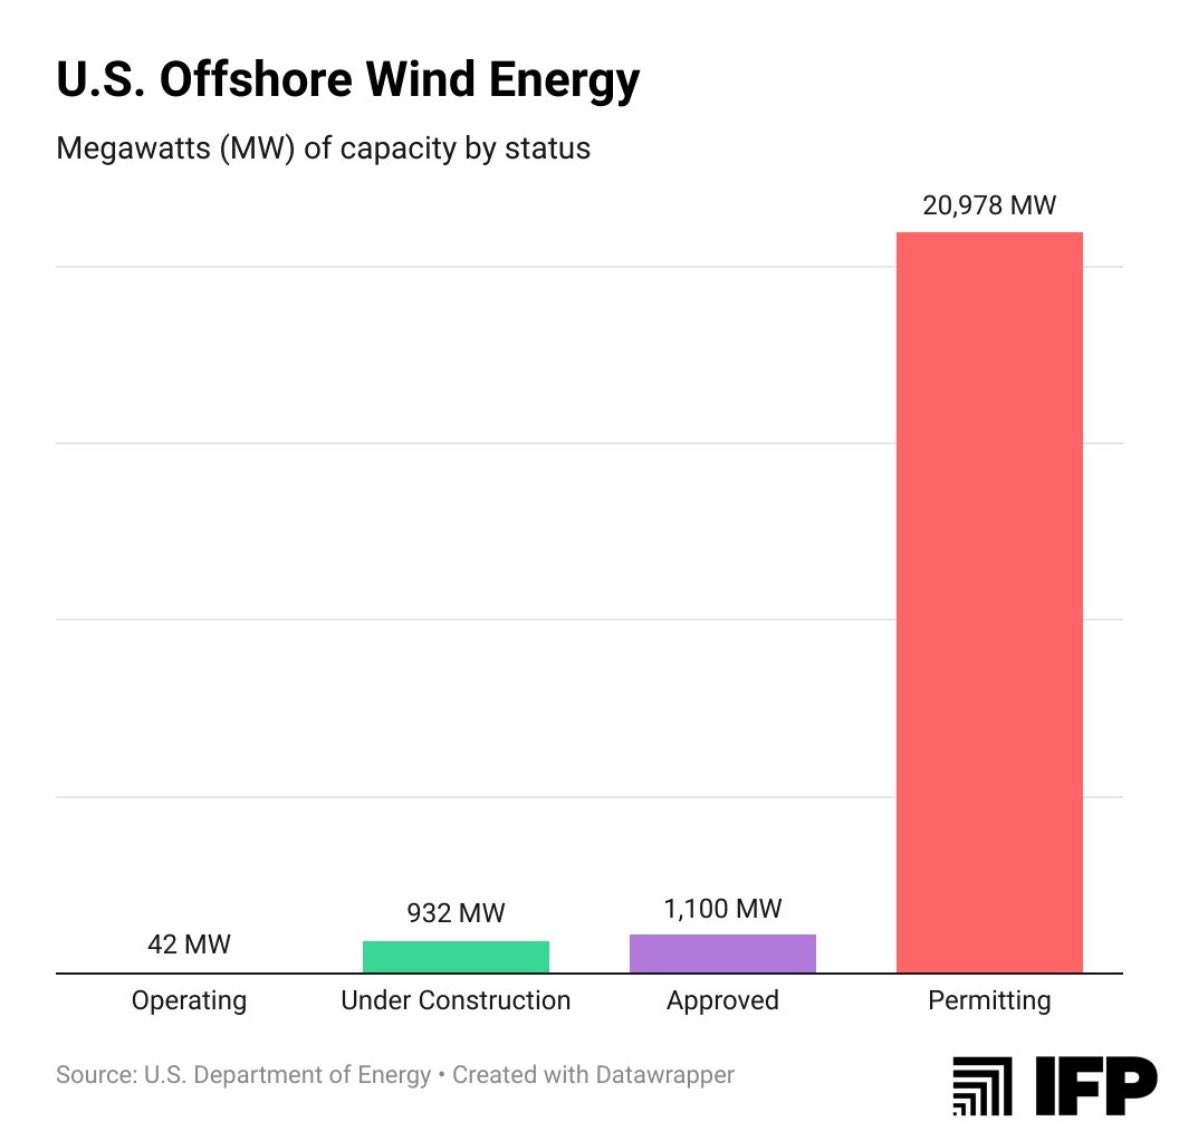 Another negative headline for offshore wind. High interest rates and rising supply chain costs mean permitting reform is even more important than ever.